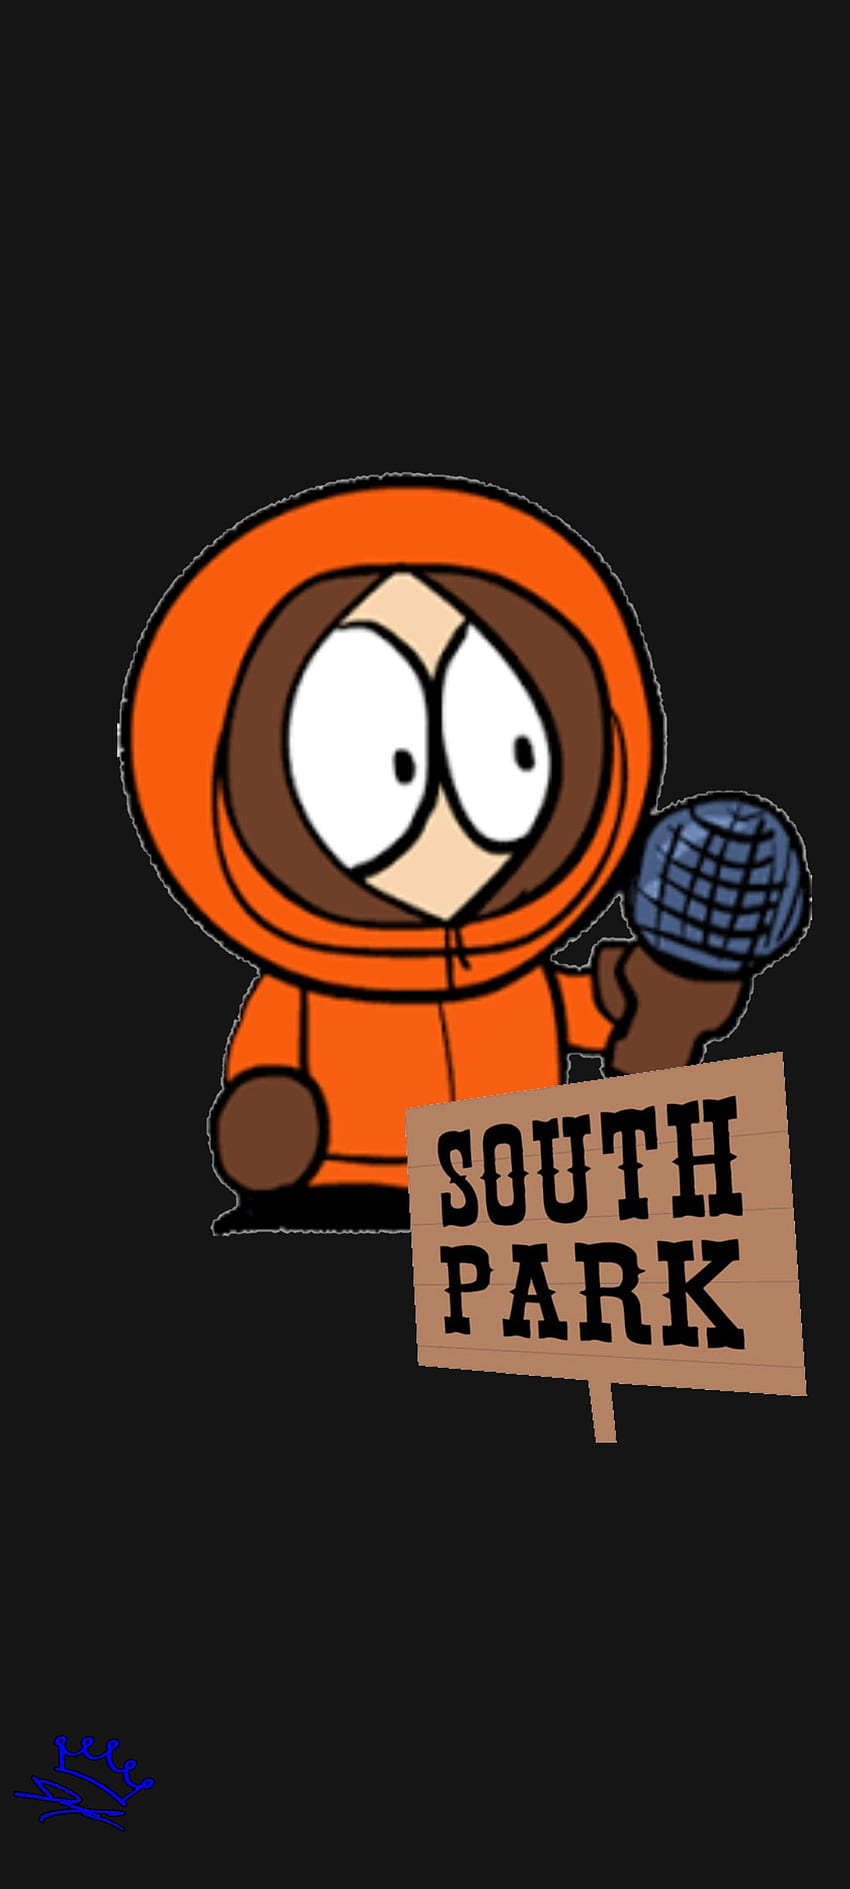 South Park FNF, Friday Night Funkin, Kyle, South Park, Stan, Cartman, Kenny HD phone wallpaper